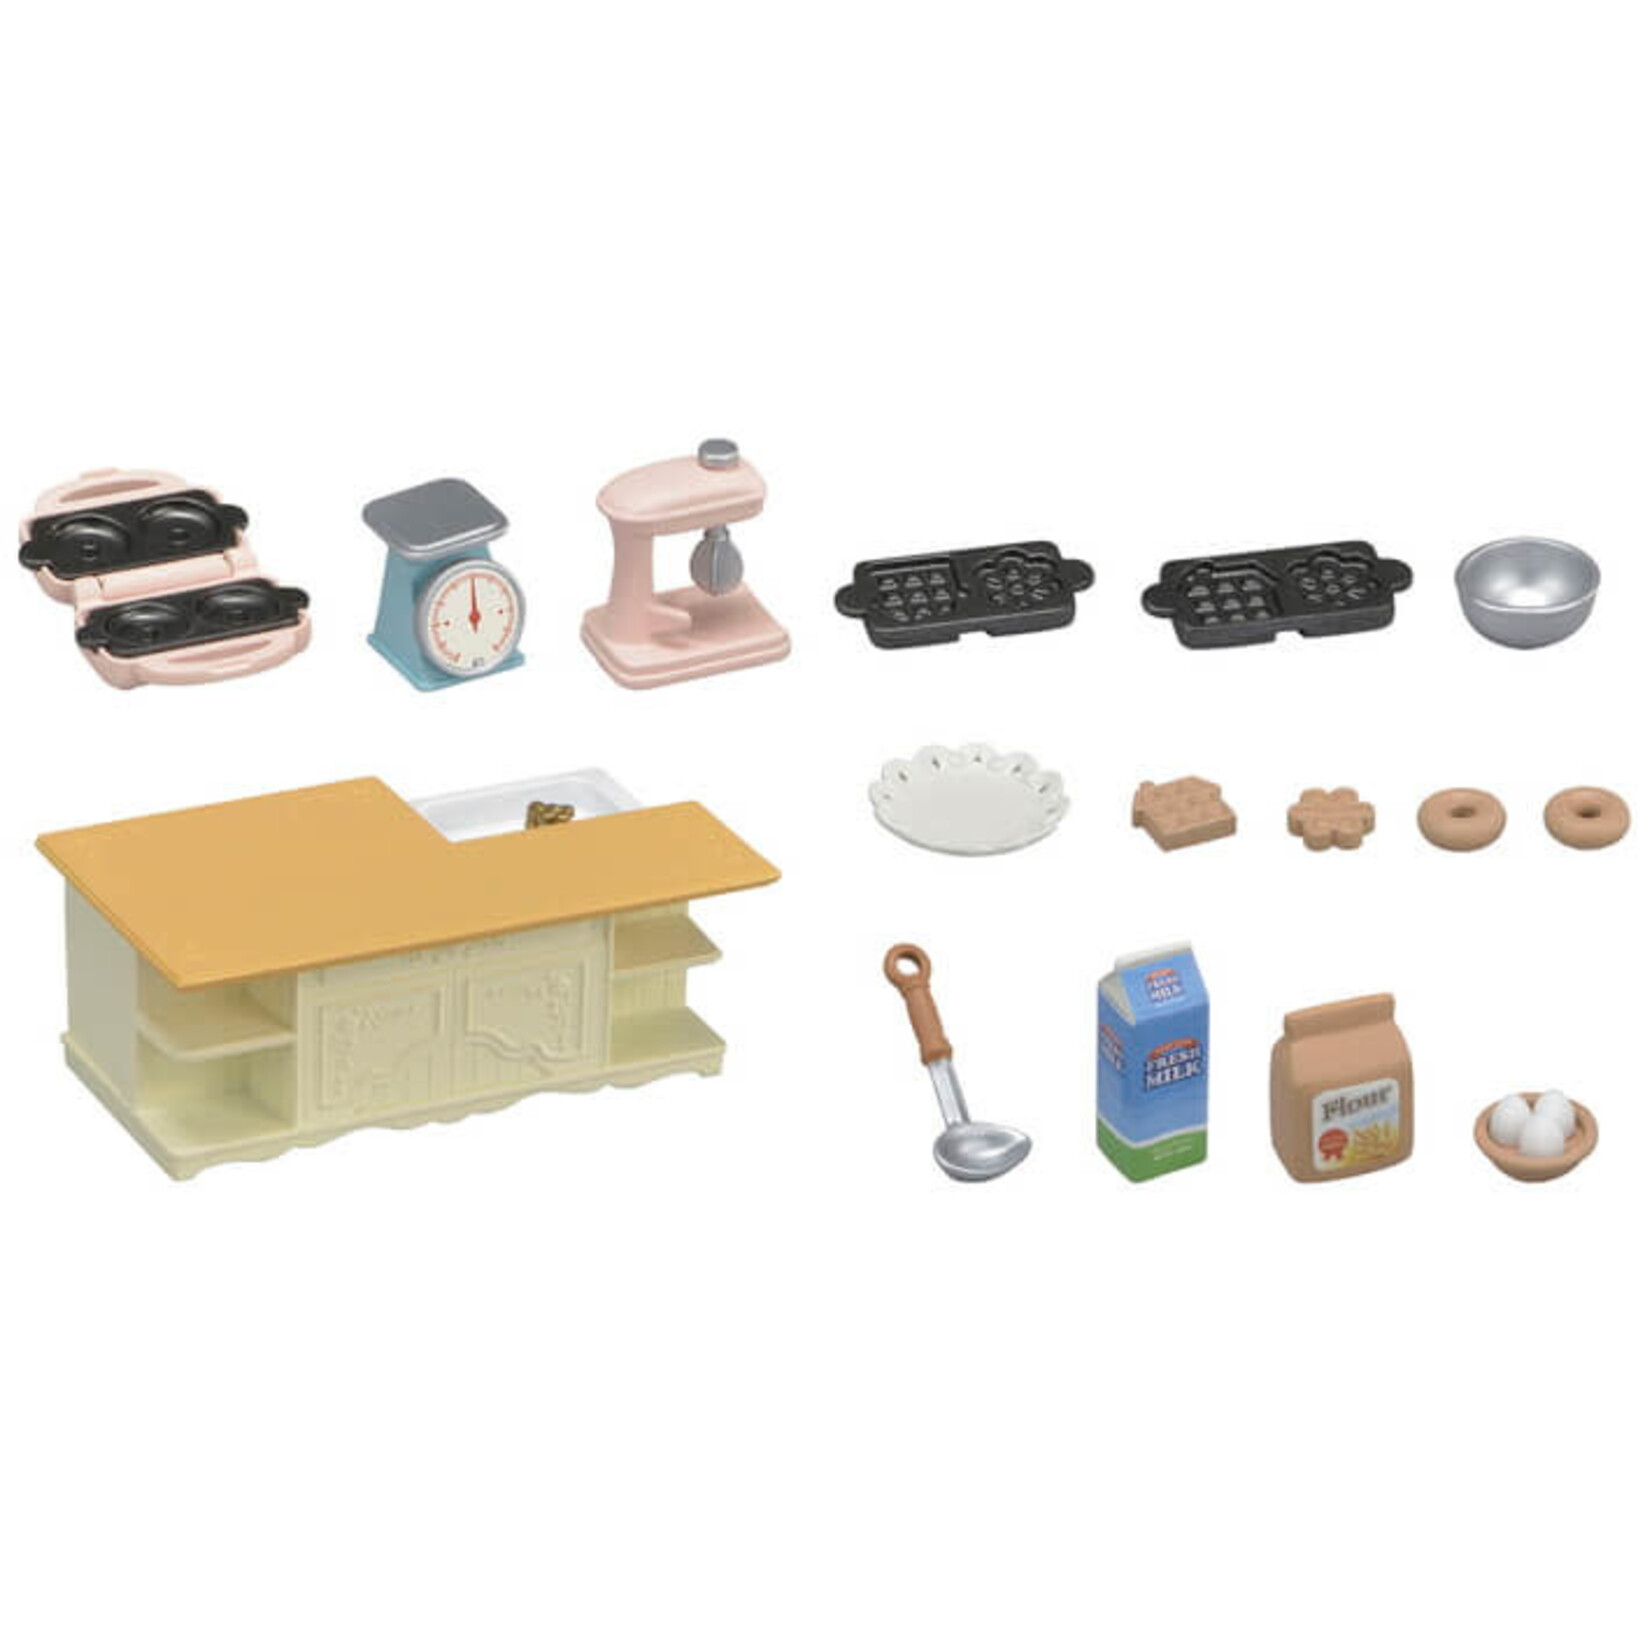 Calico Critters Calico Critters Kitchen Island Set